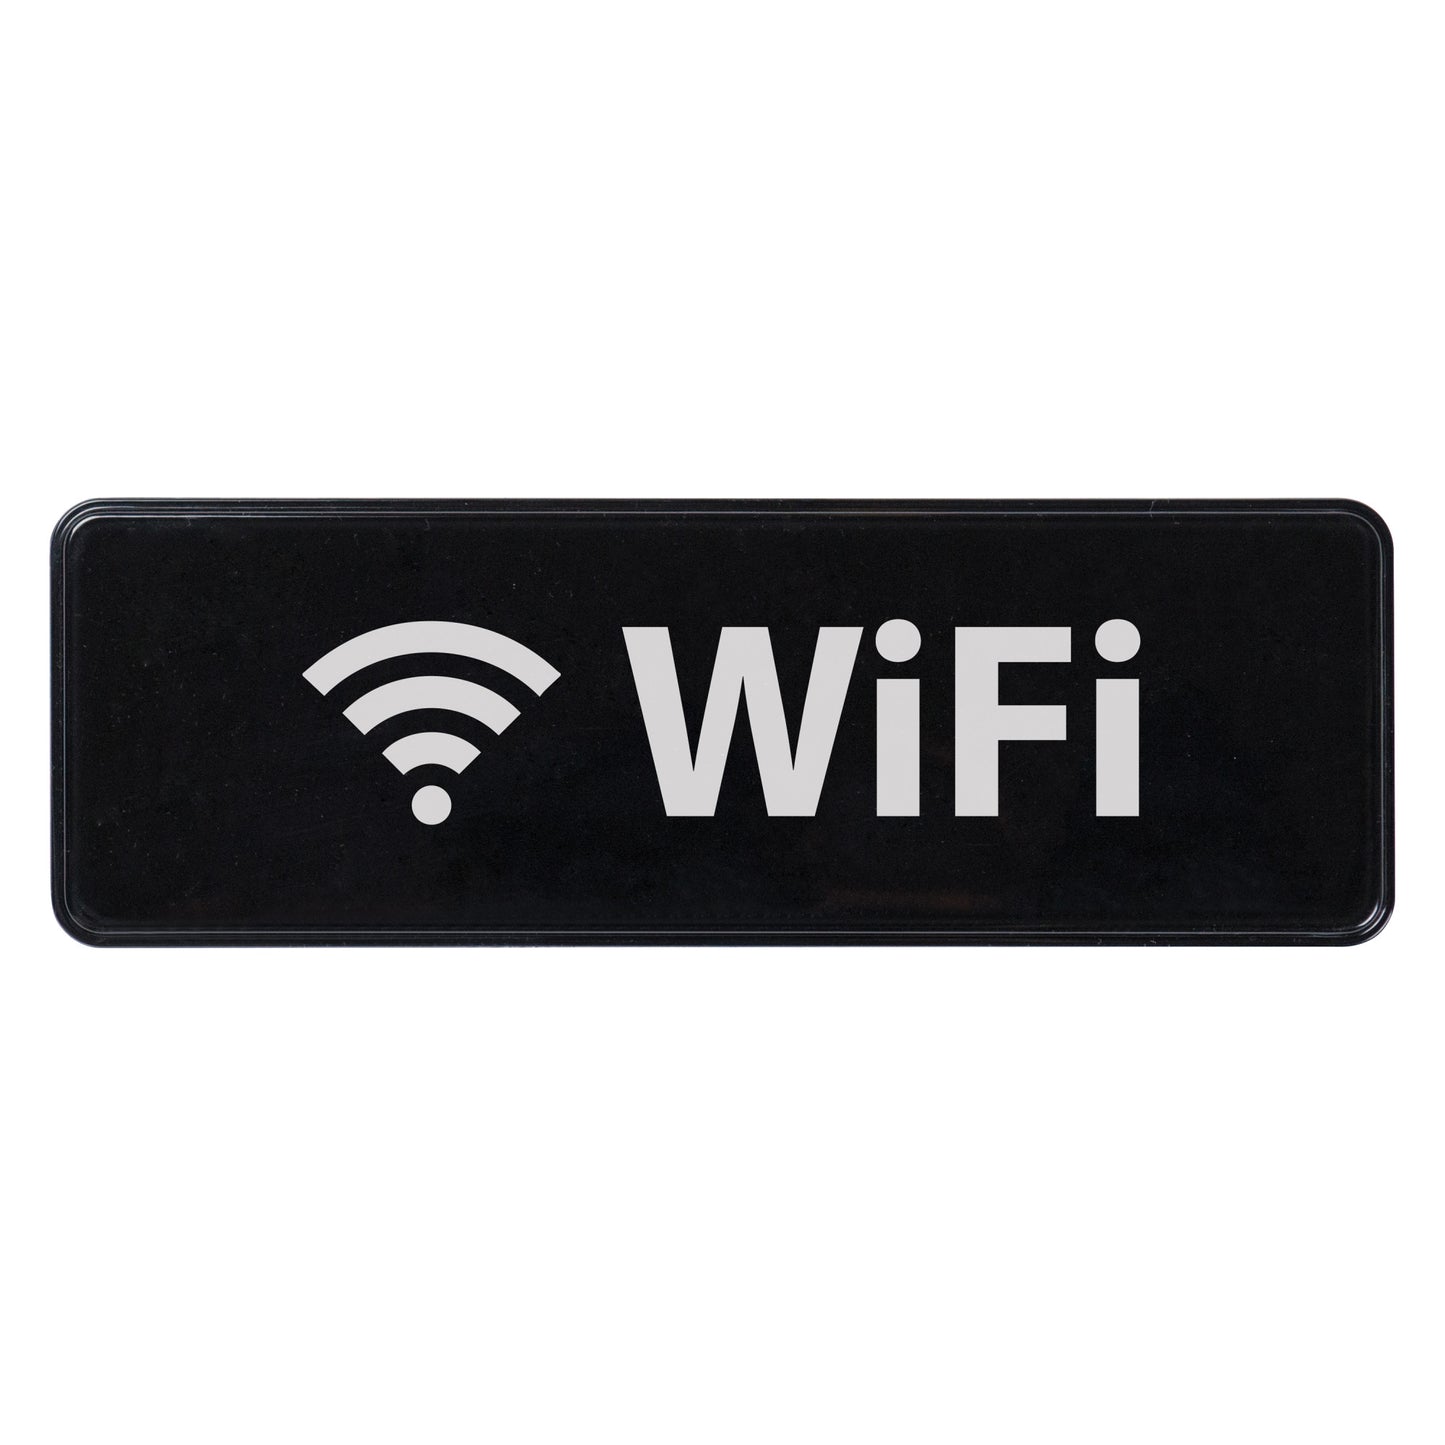 SGN-330 - Information Signs, 9"W x 3"H - SGN-330 - WiFi